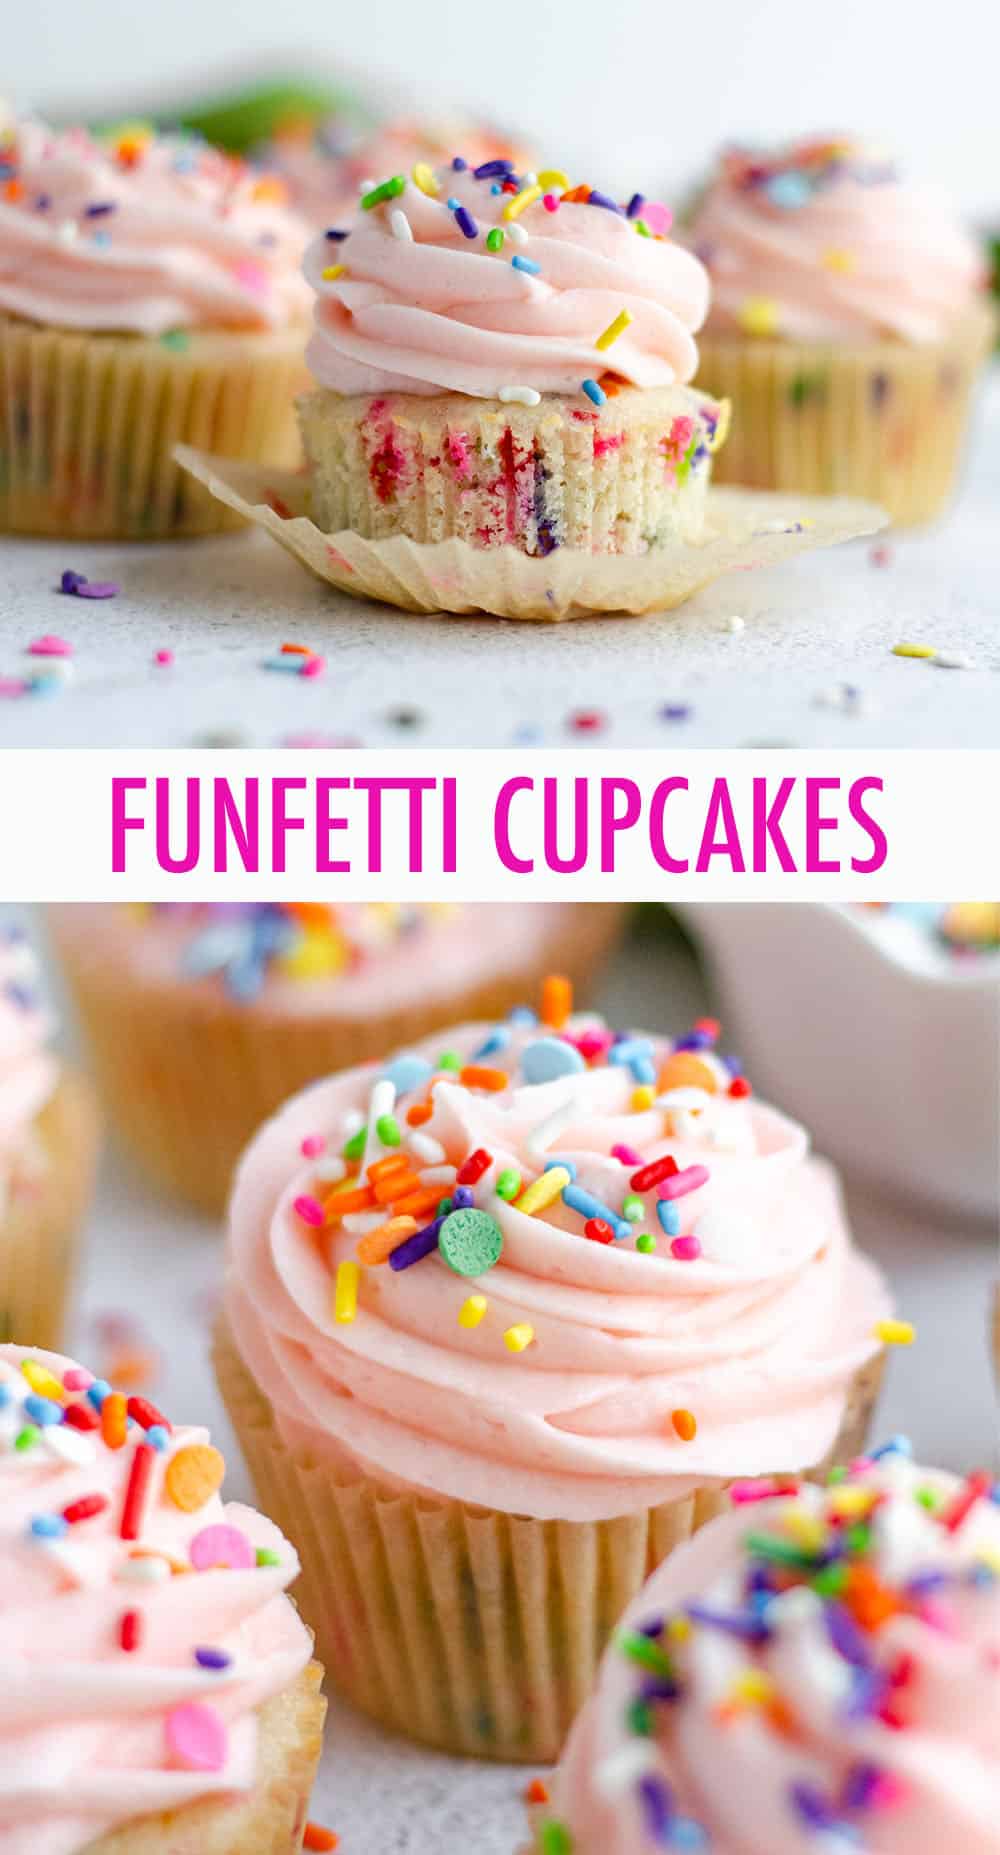 Sprinkle-speckled cupcakes that taste BETTER than the ones from the box, topped with creamy, sprinkle-filled vanilla buttercream. Ditch the mix and make your own funfetti cupcakes from scratch! via @frshaprilflours